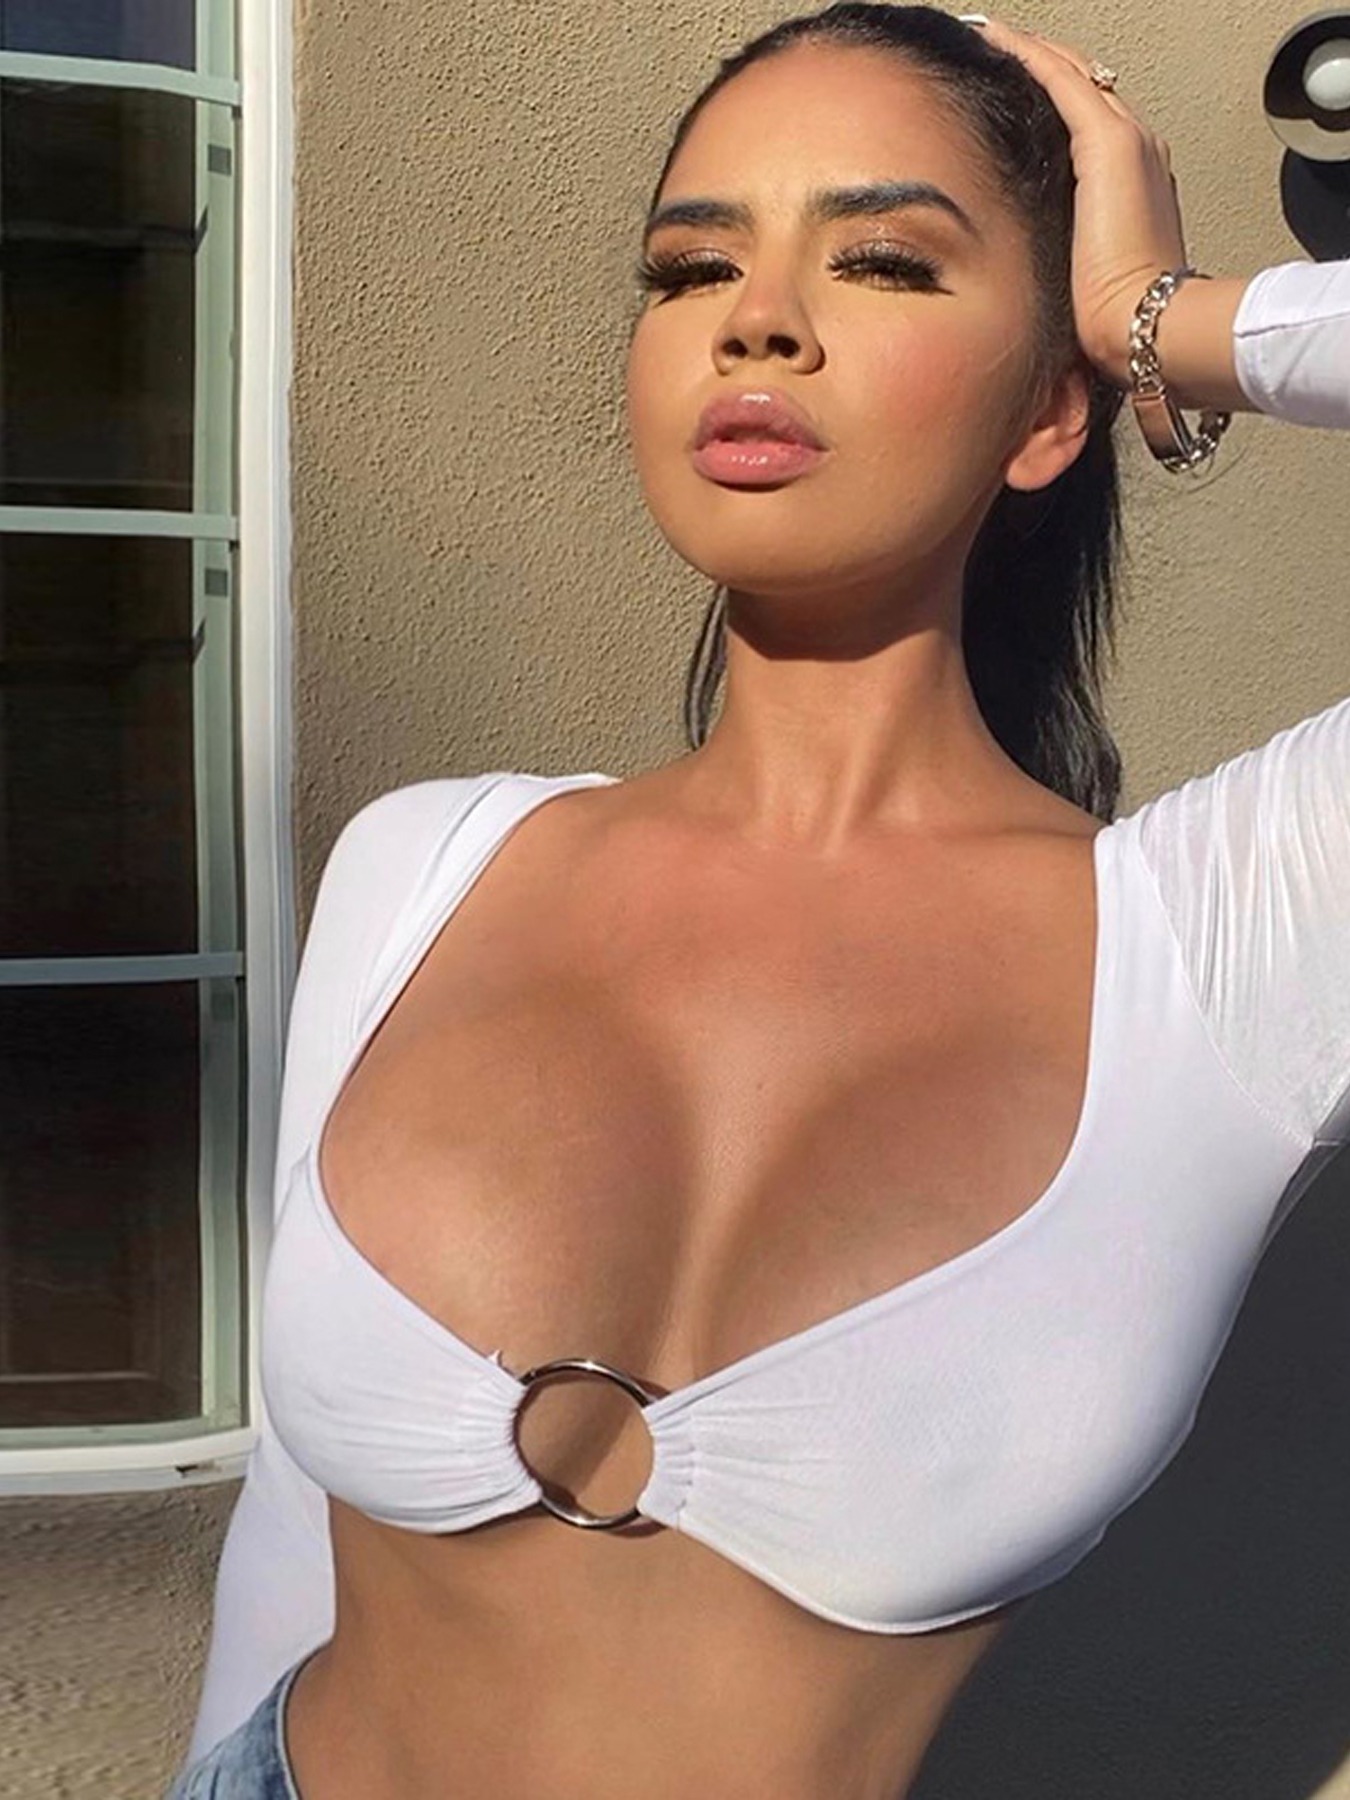 Low Cut Cleavage Tops